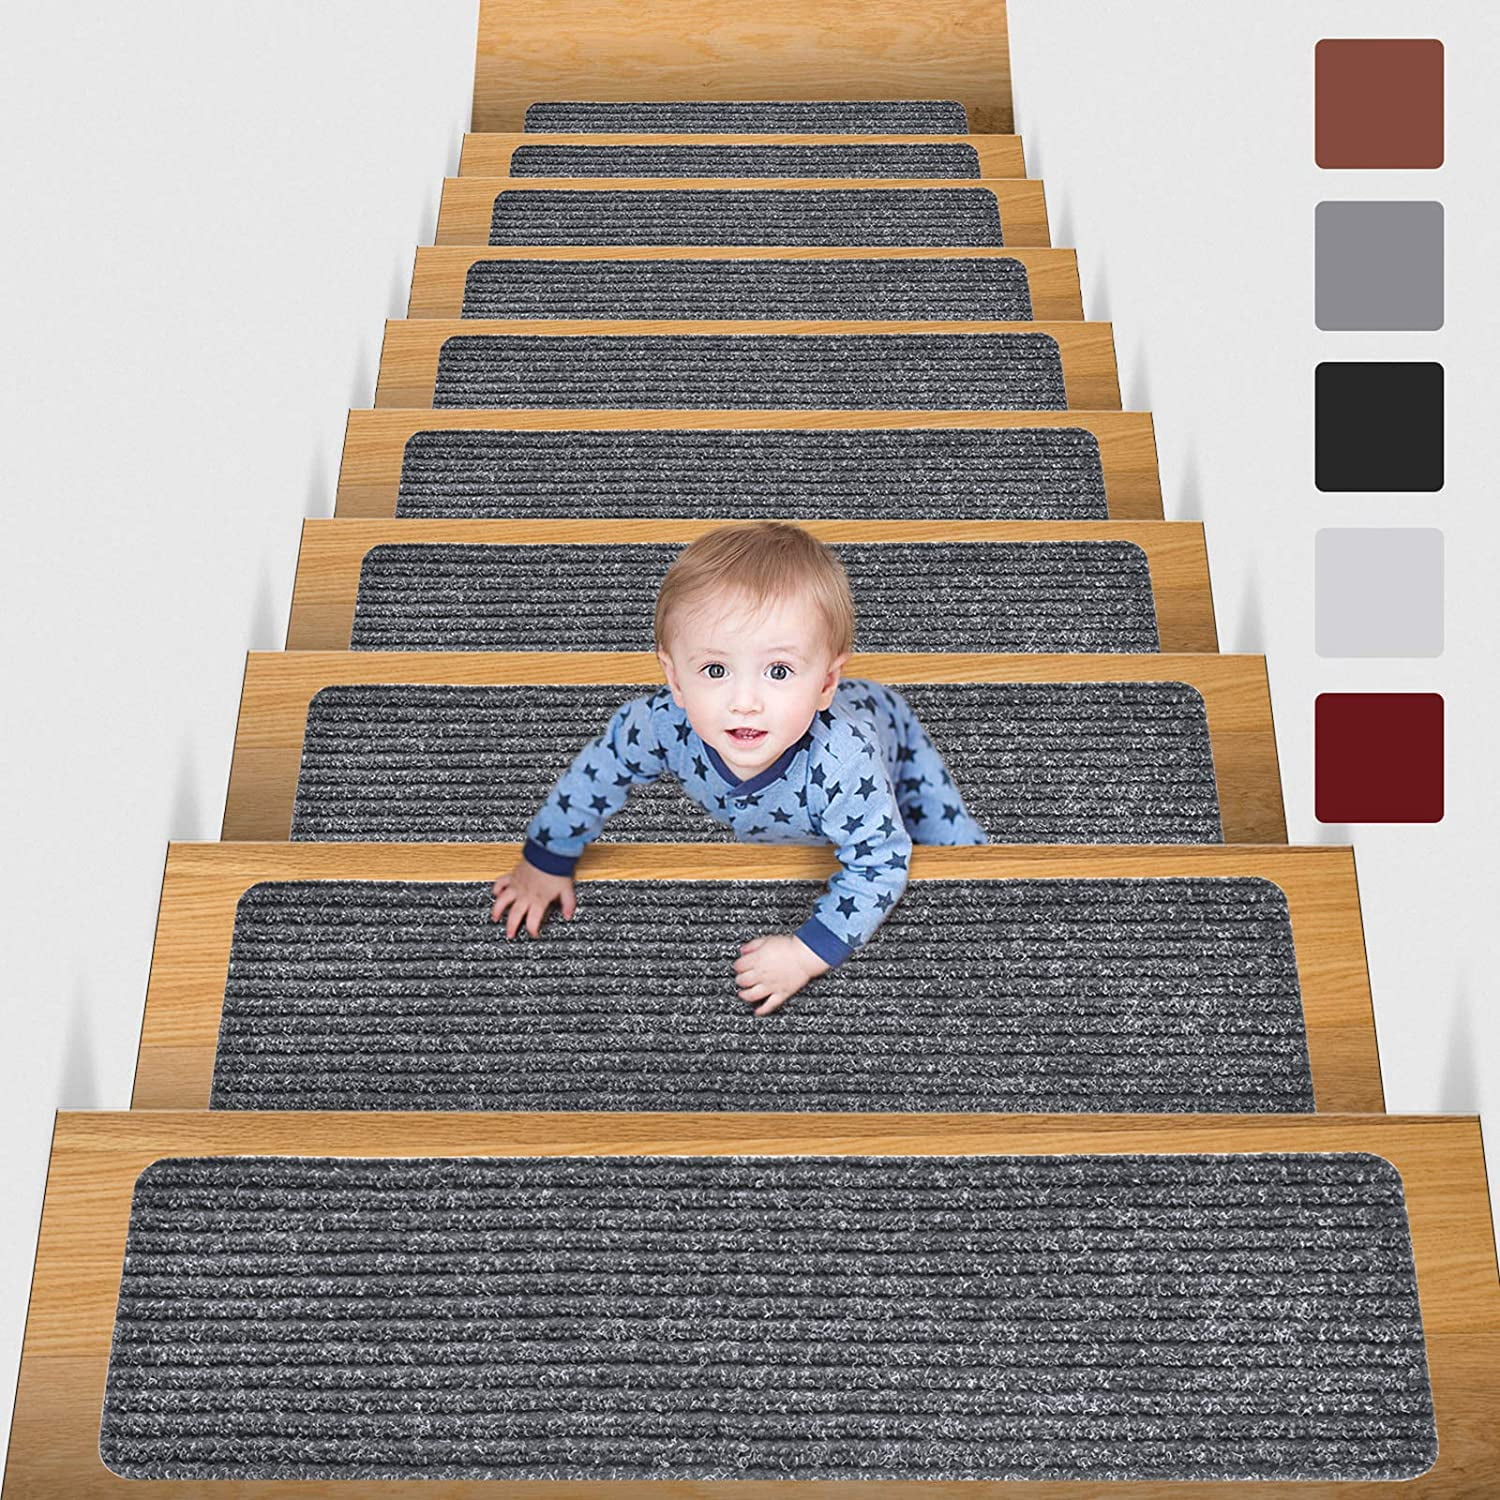 15 Skid-Resistant Stair Treads, 16 Colors/4 Sizes